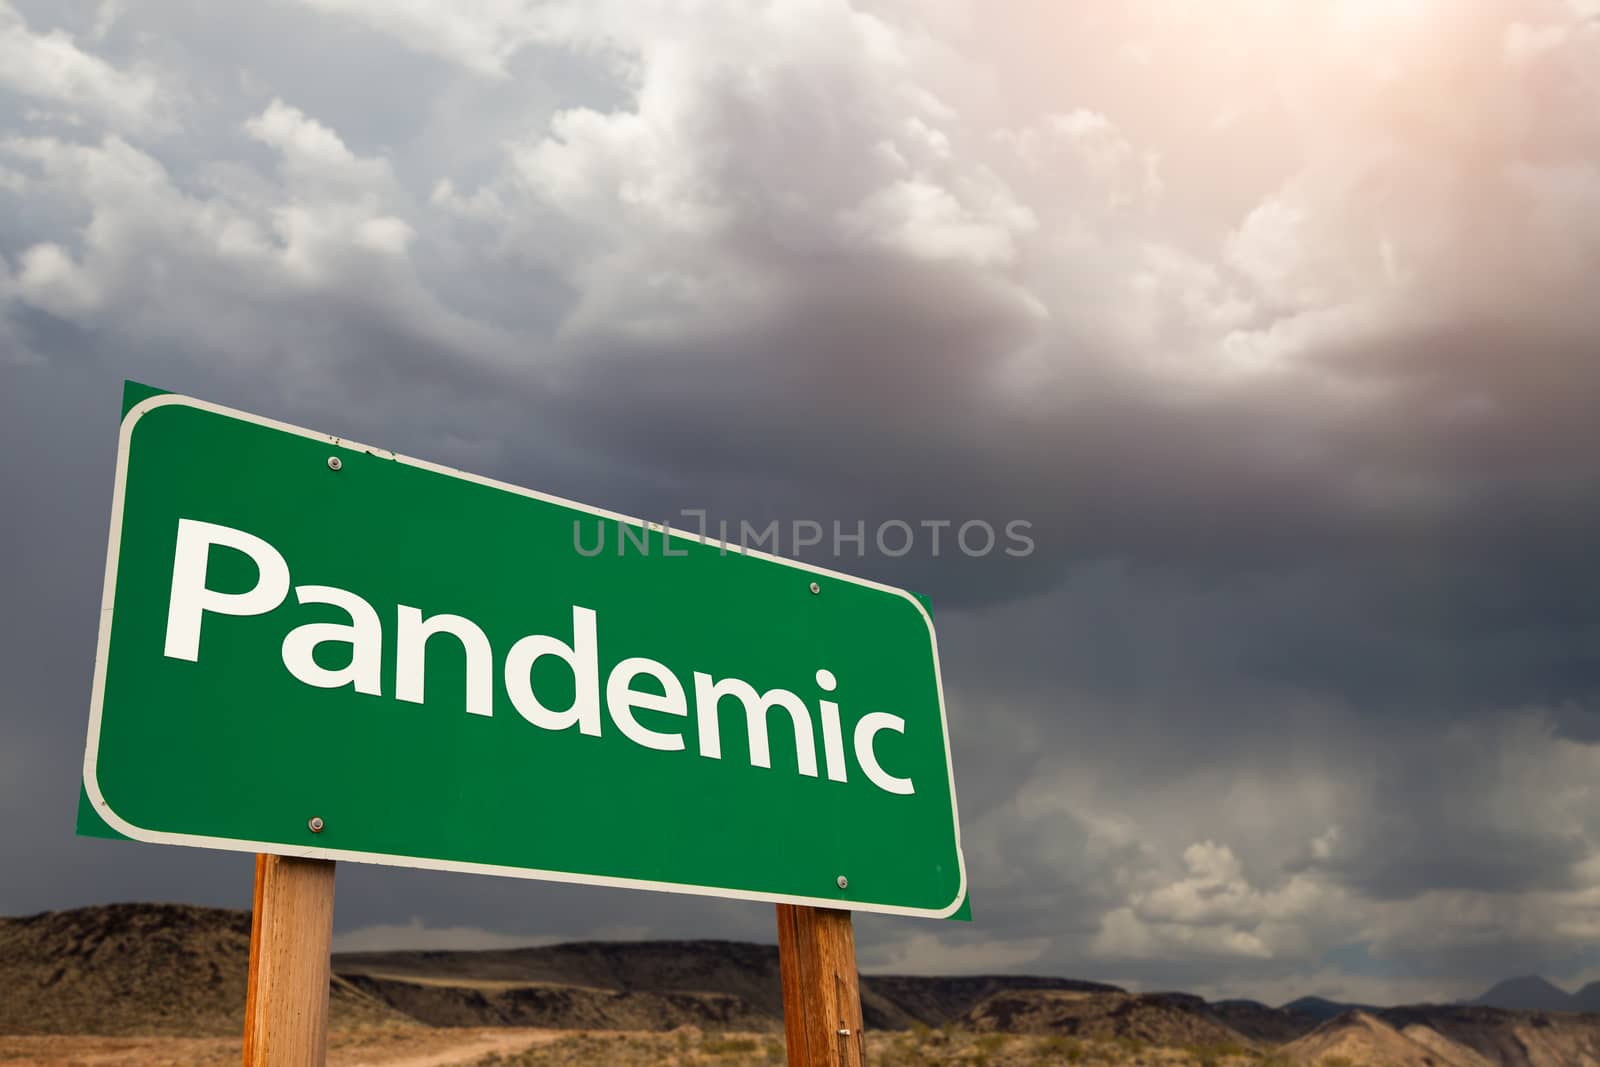 Pandemic Green Road Sign Against Ominous Stormy Cloudy Sky by Feverpitched